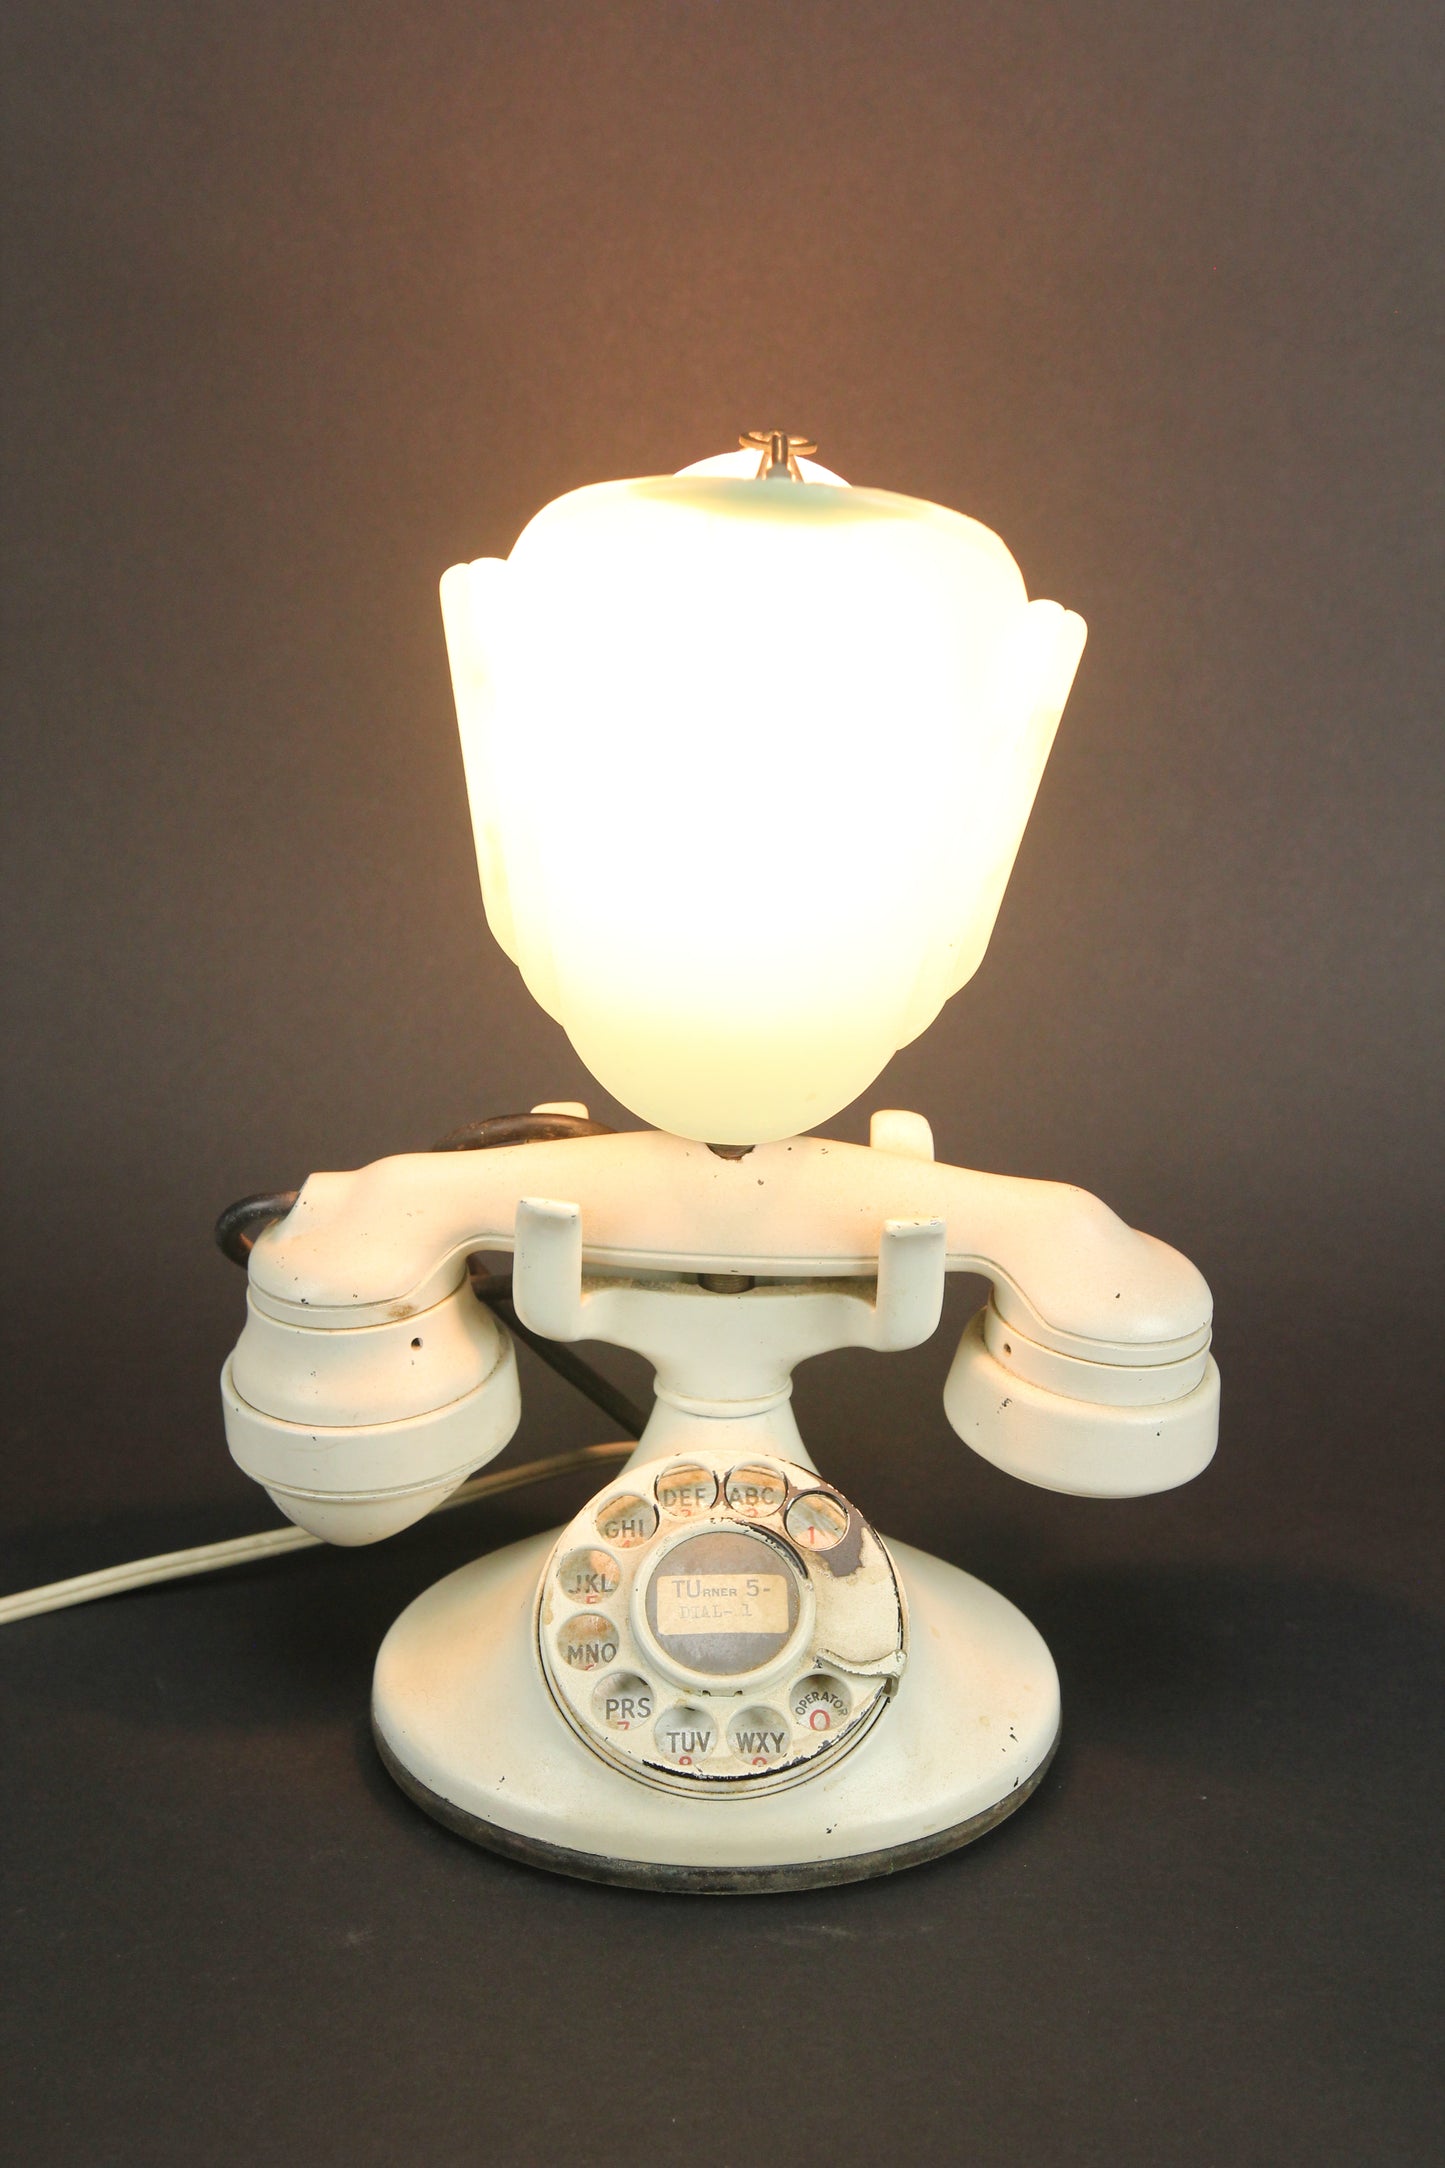 Antique White Rotary Phone Accent Lamp Conversion with Art Deco Green Shade